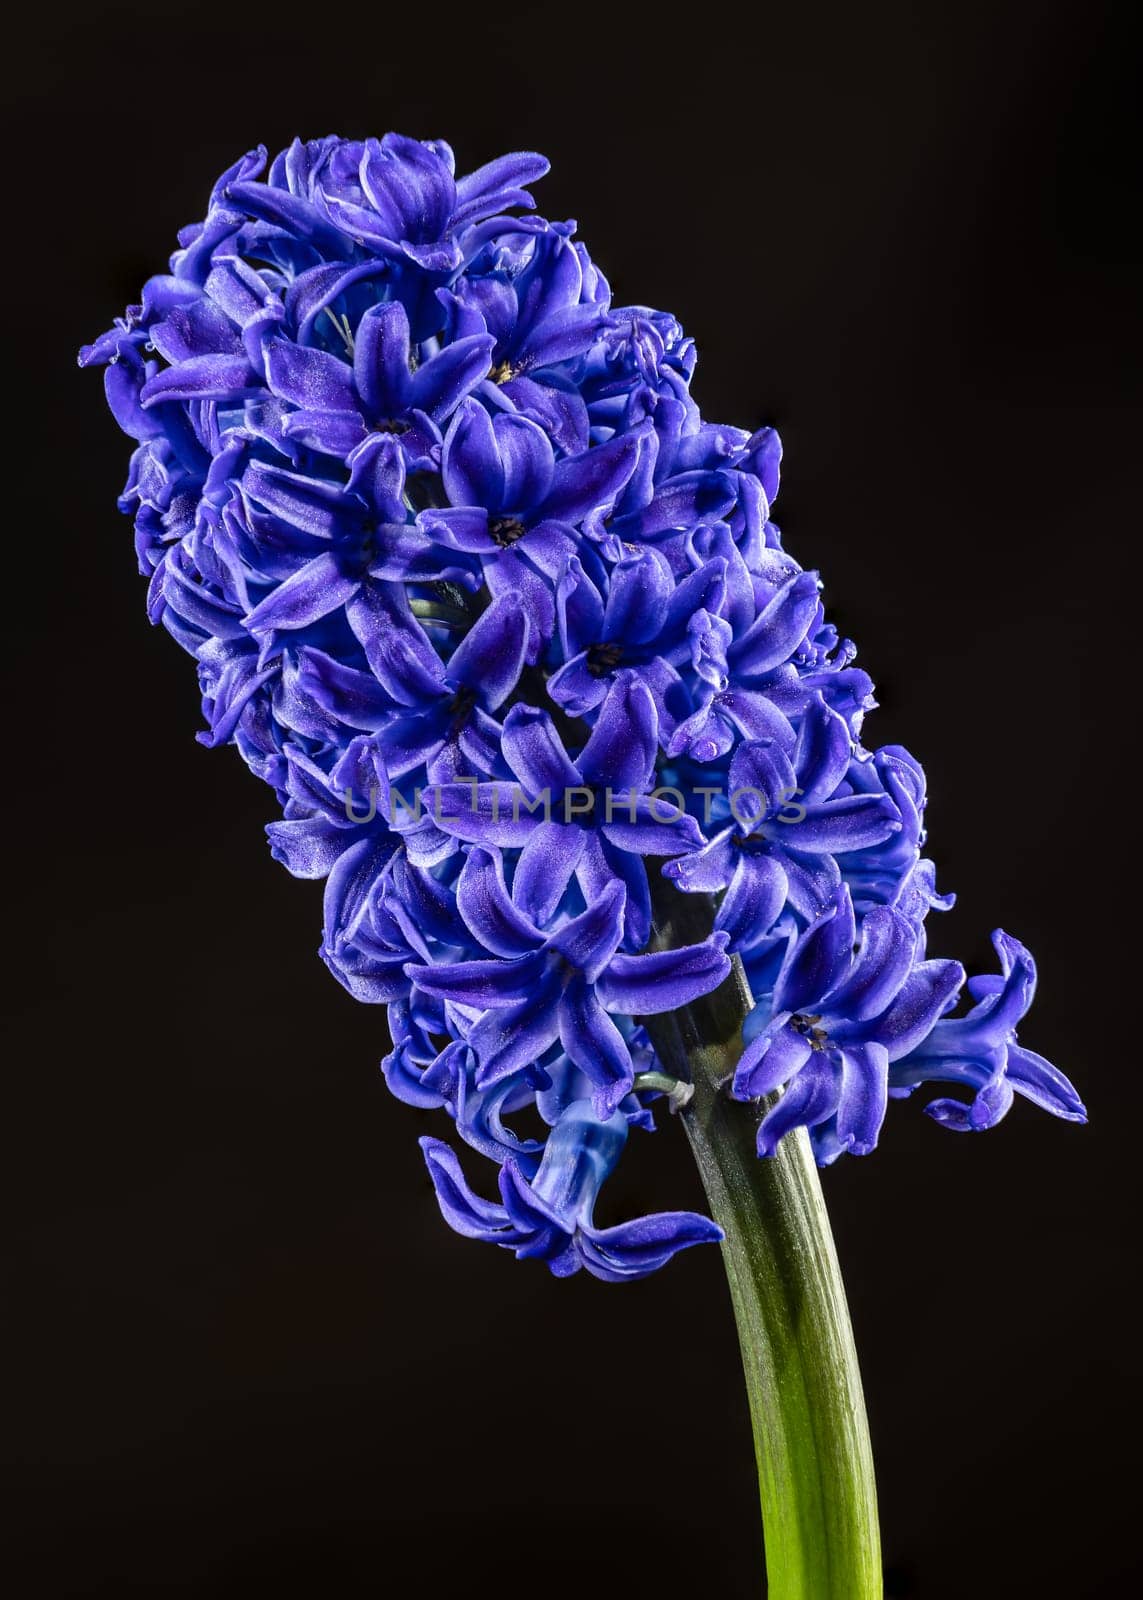 Beautiful blooming Purple Hyacinth flower on a black background. Flower head close-up.